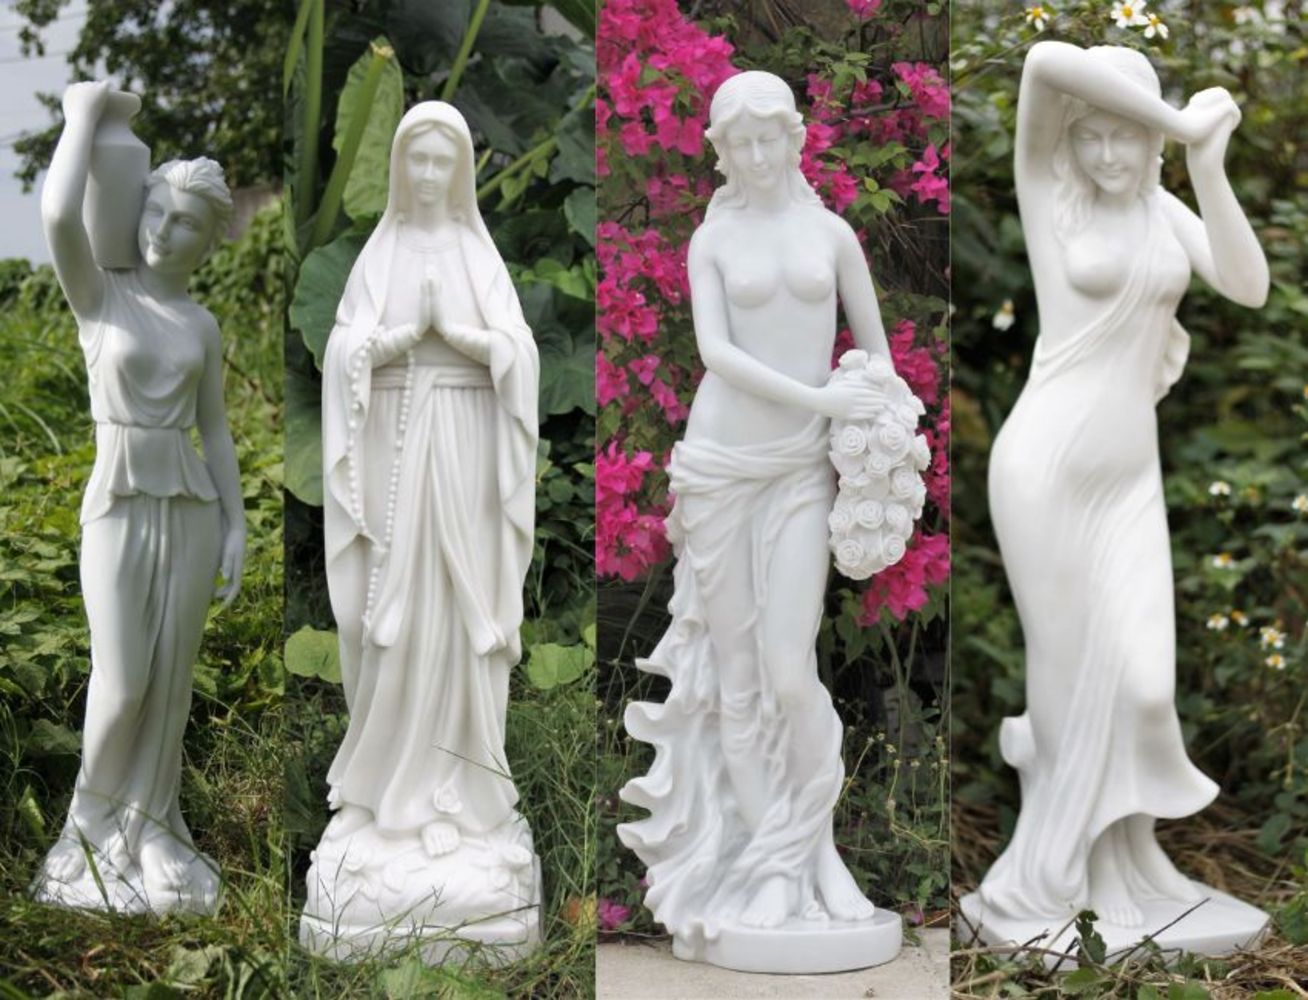 EXCLUSIVE WHOLESALE COLLECTION OF GARDEN ART STATUES / ORNAMENTS / SCULPTURES & LAUREL HEDGING PLANTS! SALE Ends Thursday 2nd March From 1pm